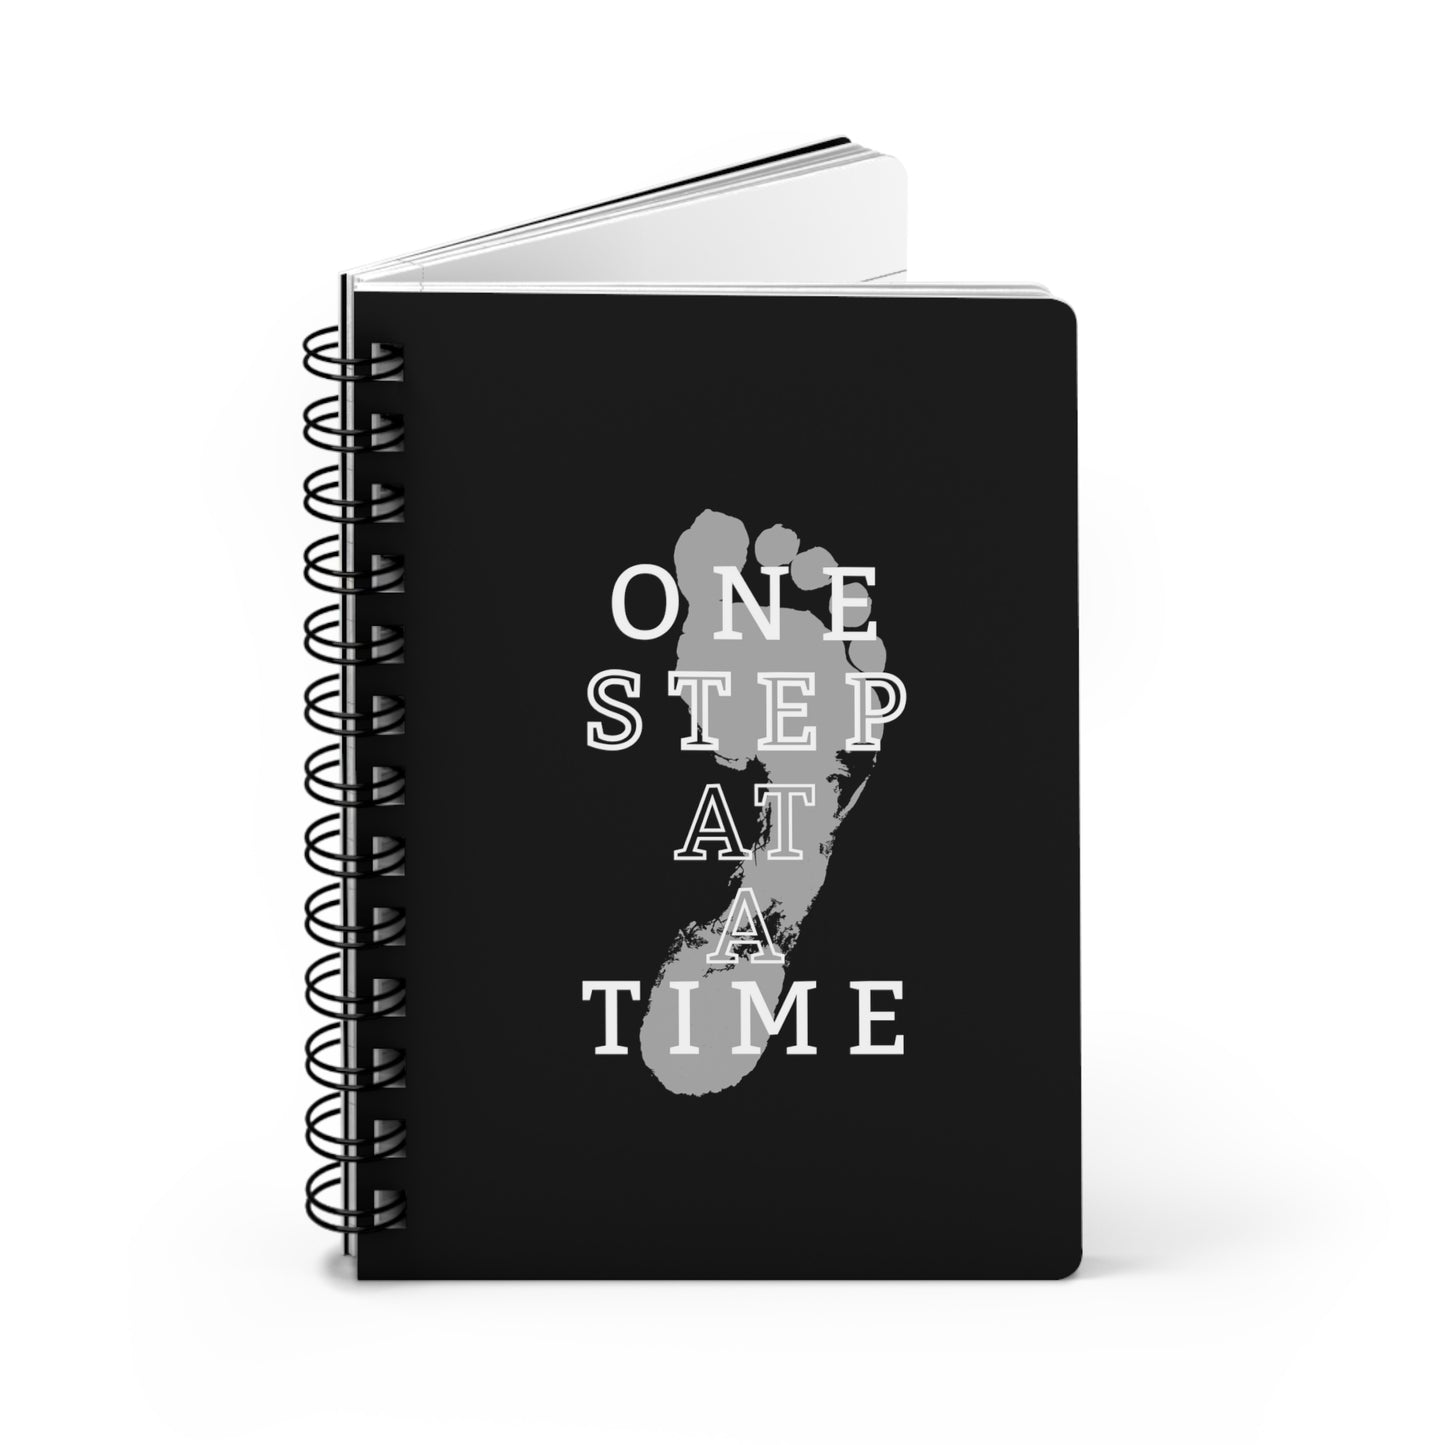 "One Step At A Time" 5"x7" Recovery Journal